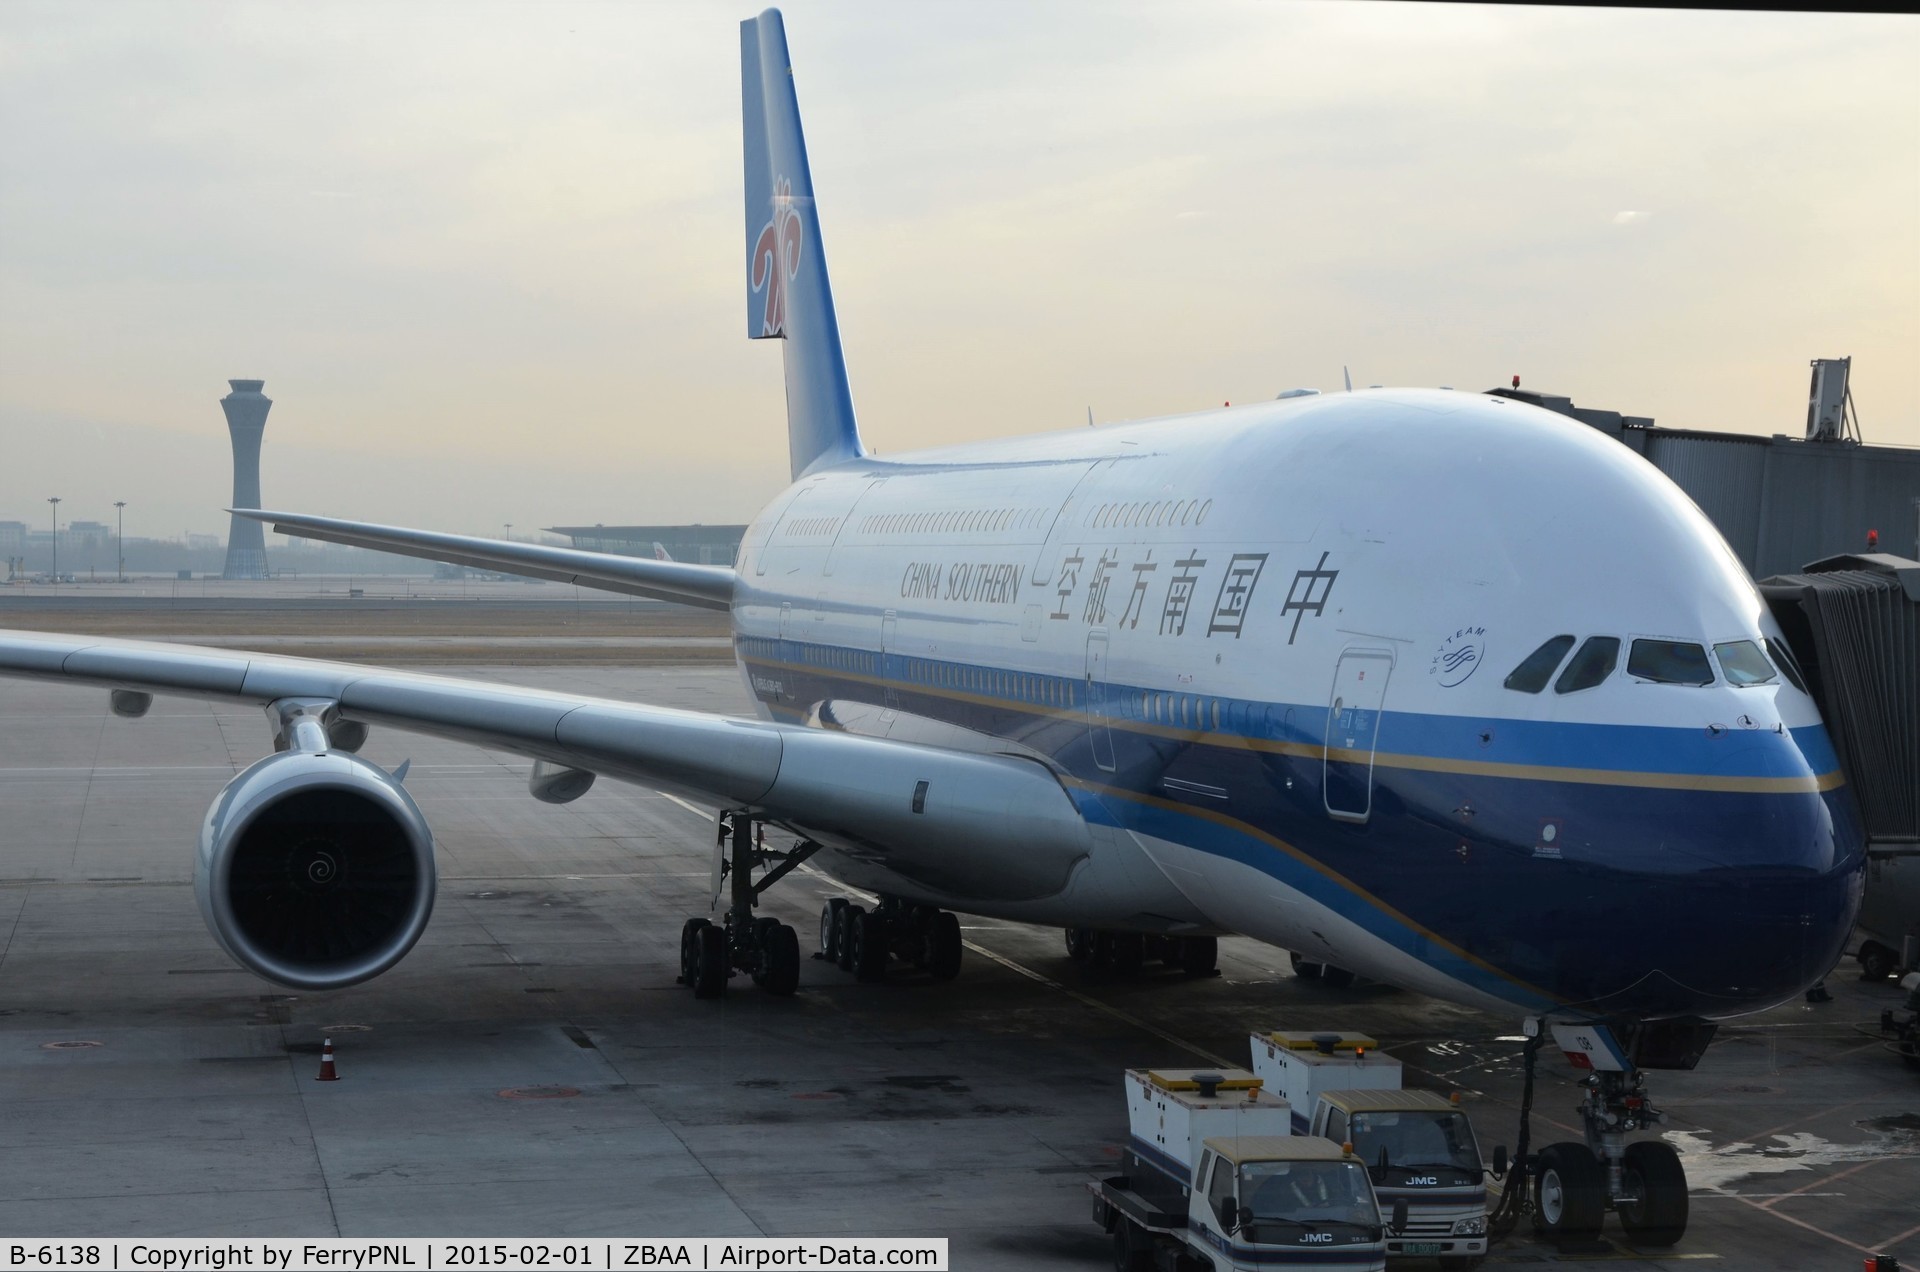 B-6138, 2011 Airbus A380-841 C/N 054, China Southern A388 at the gate for a flight to CAN